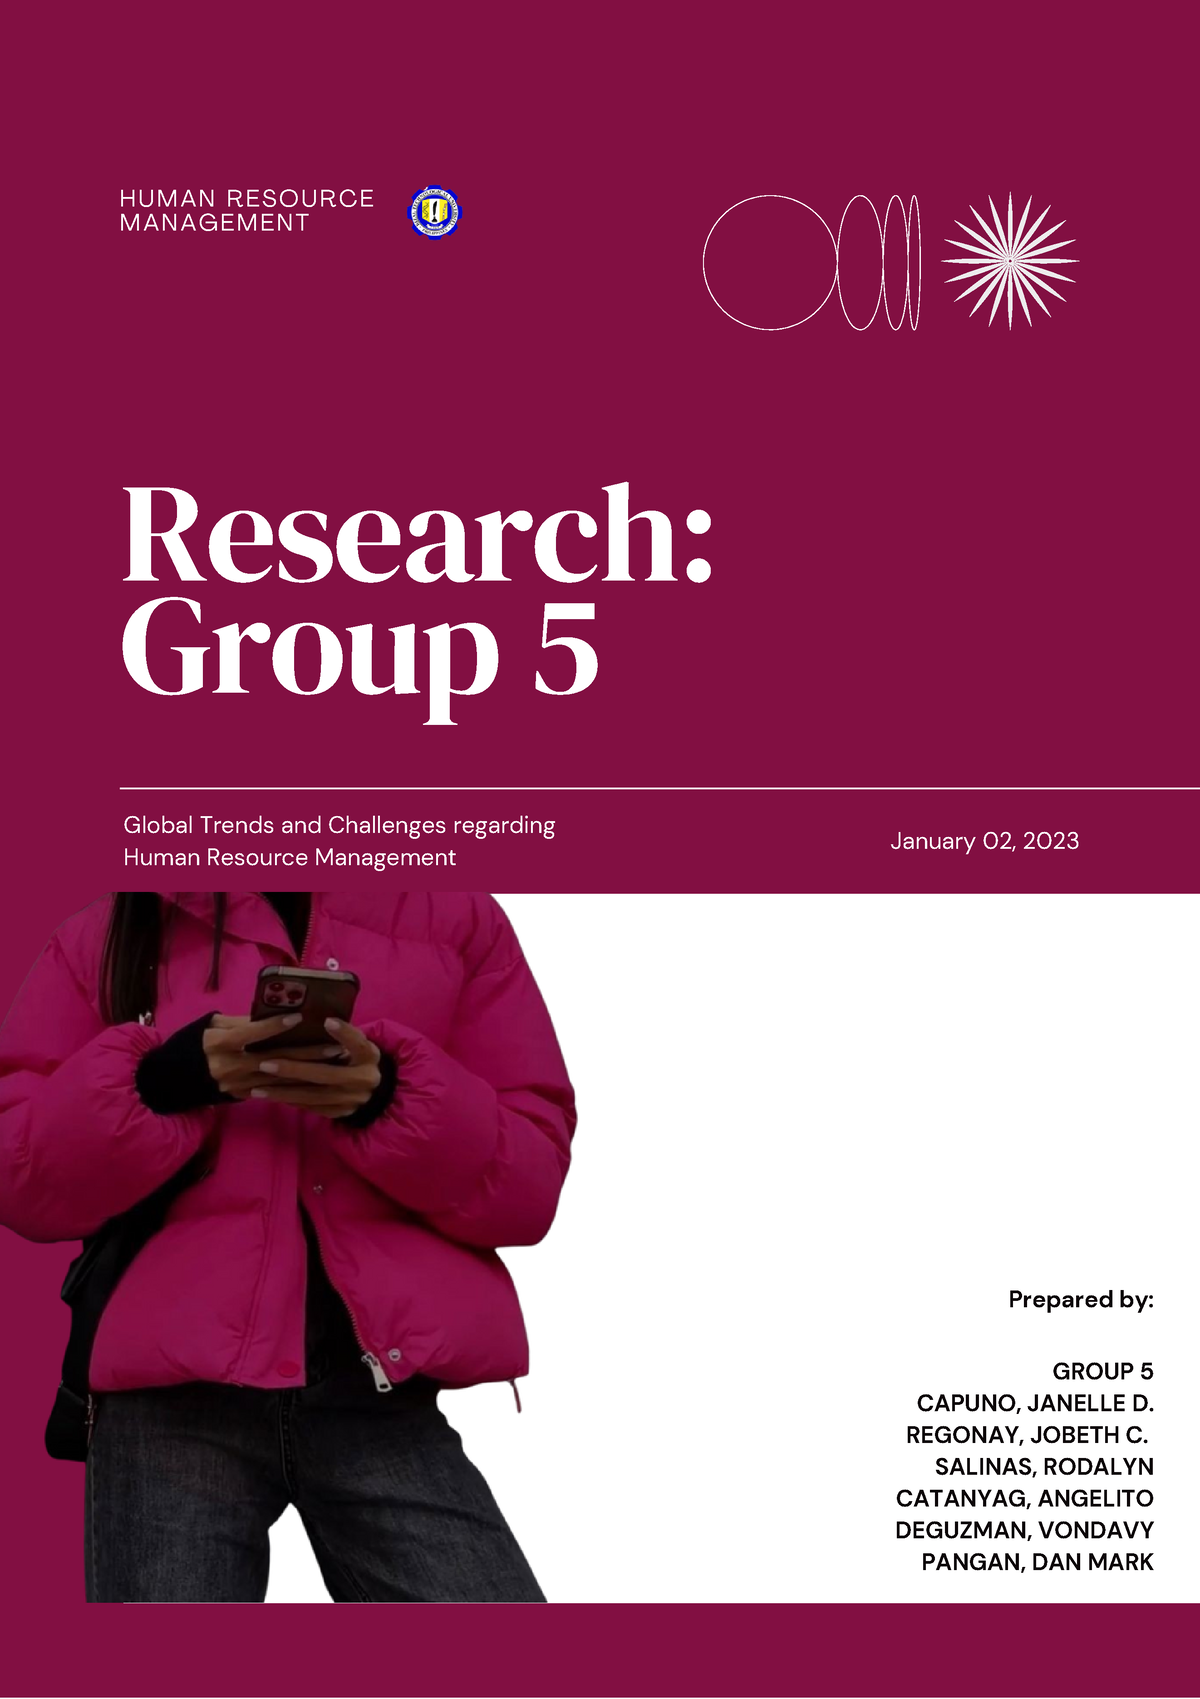 hrm research topics 2021